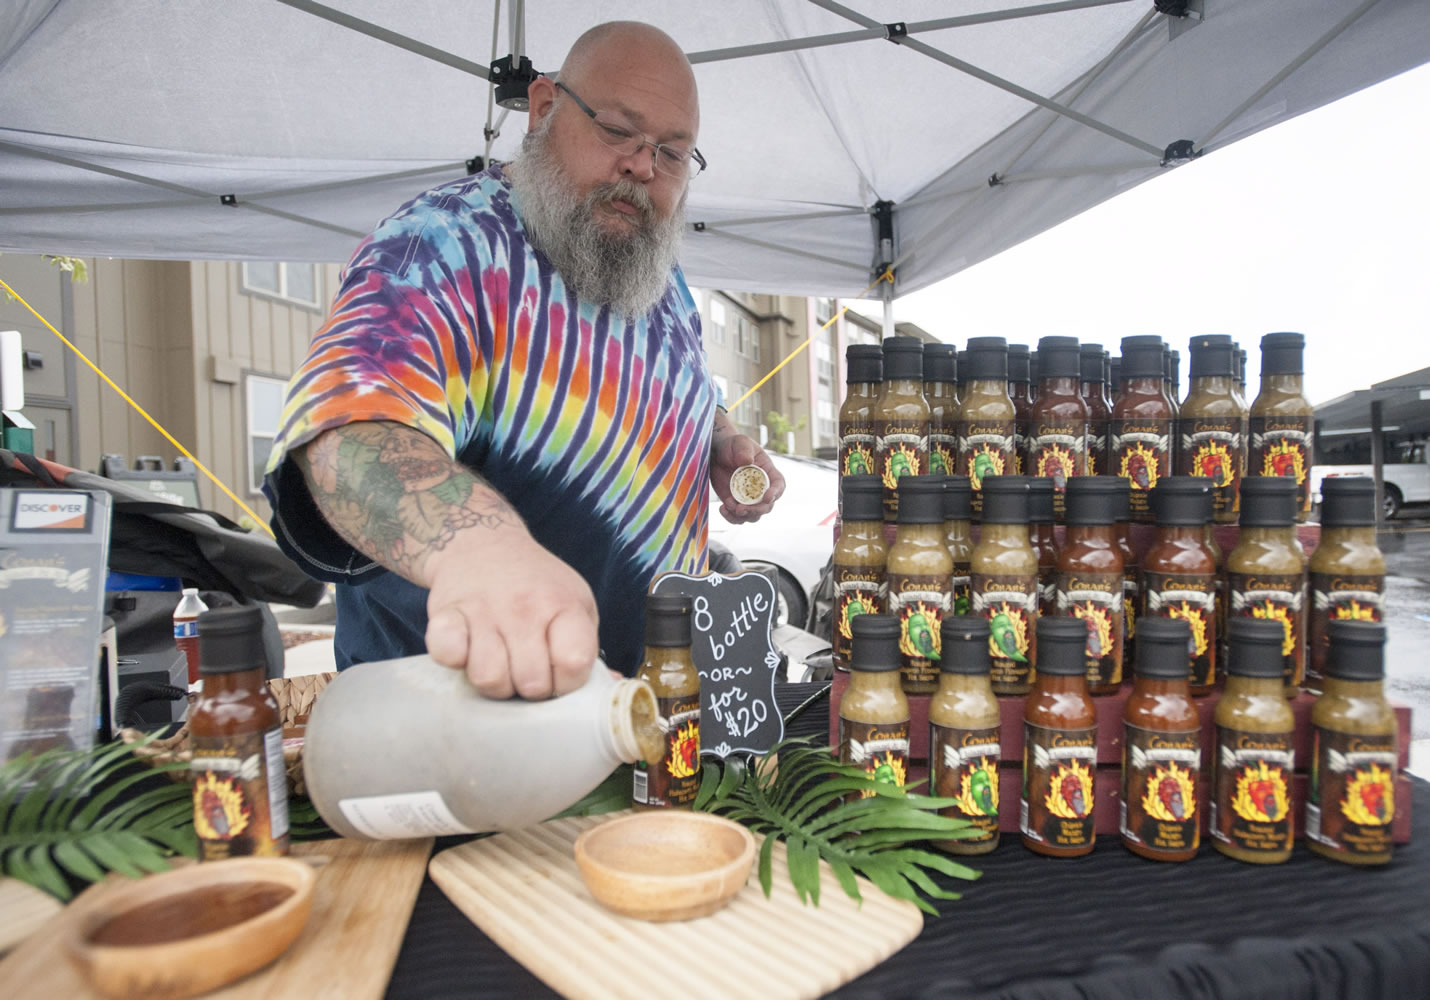 Hot sauce maker Conan Miller prepares samples at his booth at a Farmers Market at Columbia Tech Center in Vancouver on Thursday.